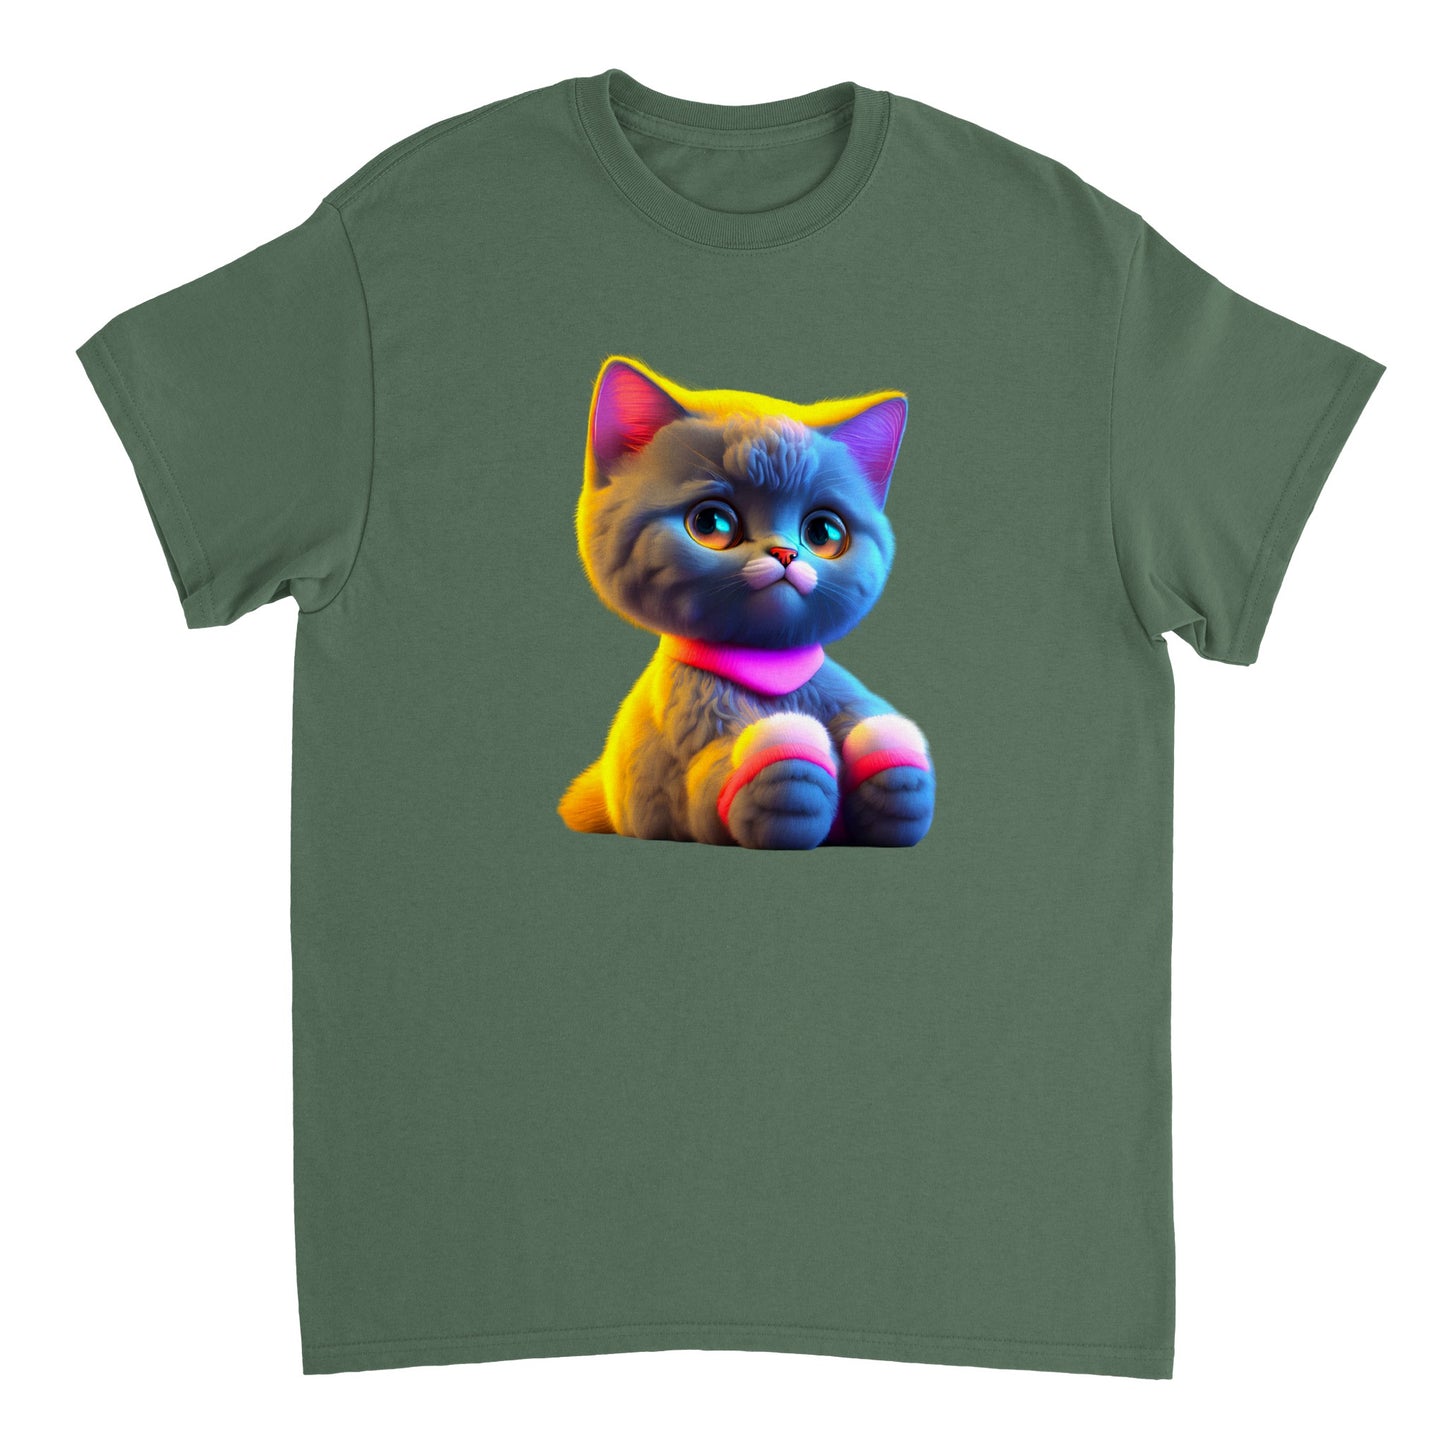 Adorable, Cool, Cute Cats and Kittens Toy - Heavyweight Unisex Crewneck T-shirt 39